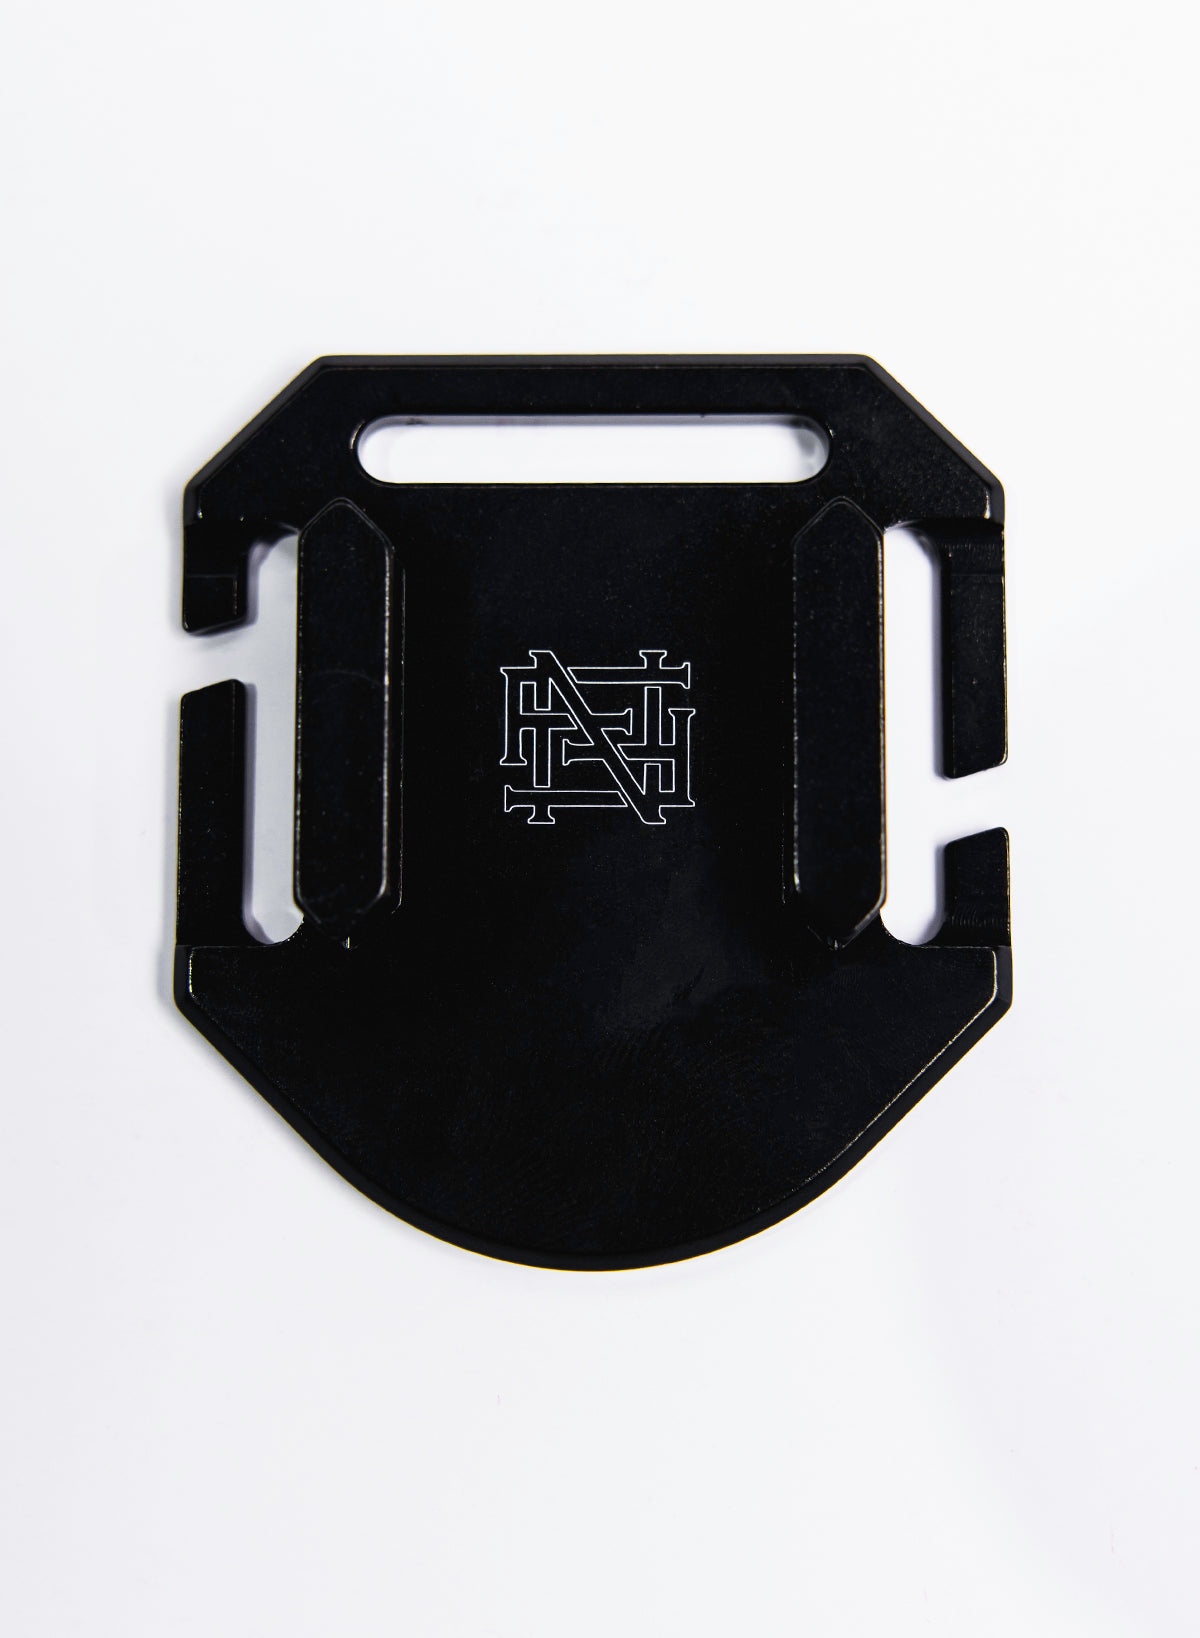 The photo shows the mounting plate for our Apex GoPro Mount. The bracket features our monogram Flag nor Fail logo.